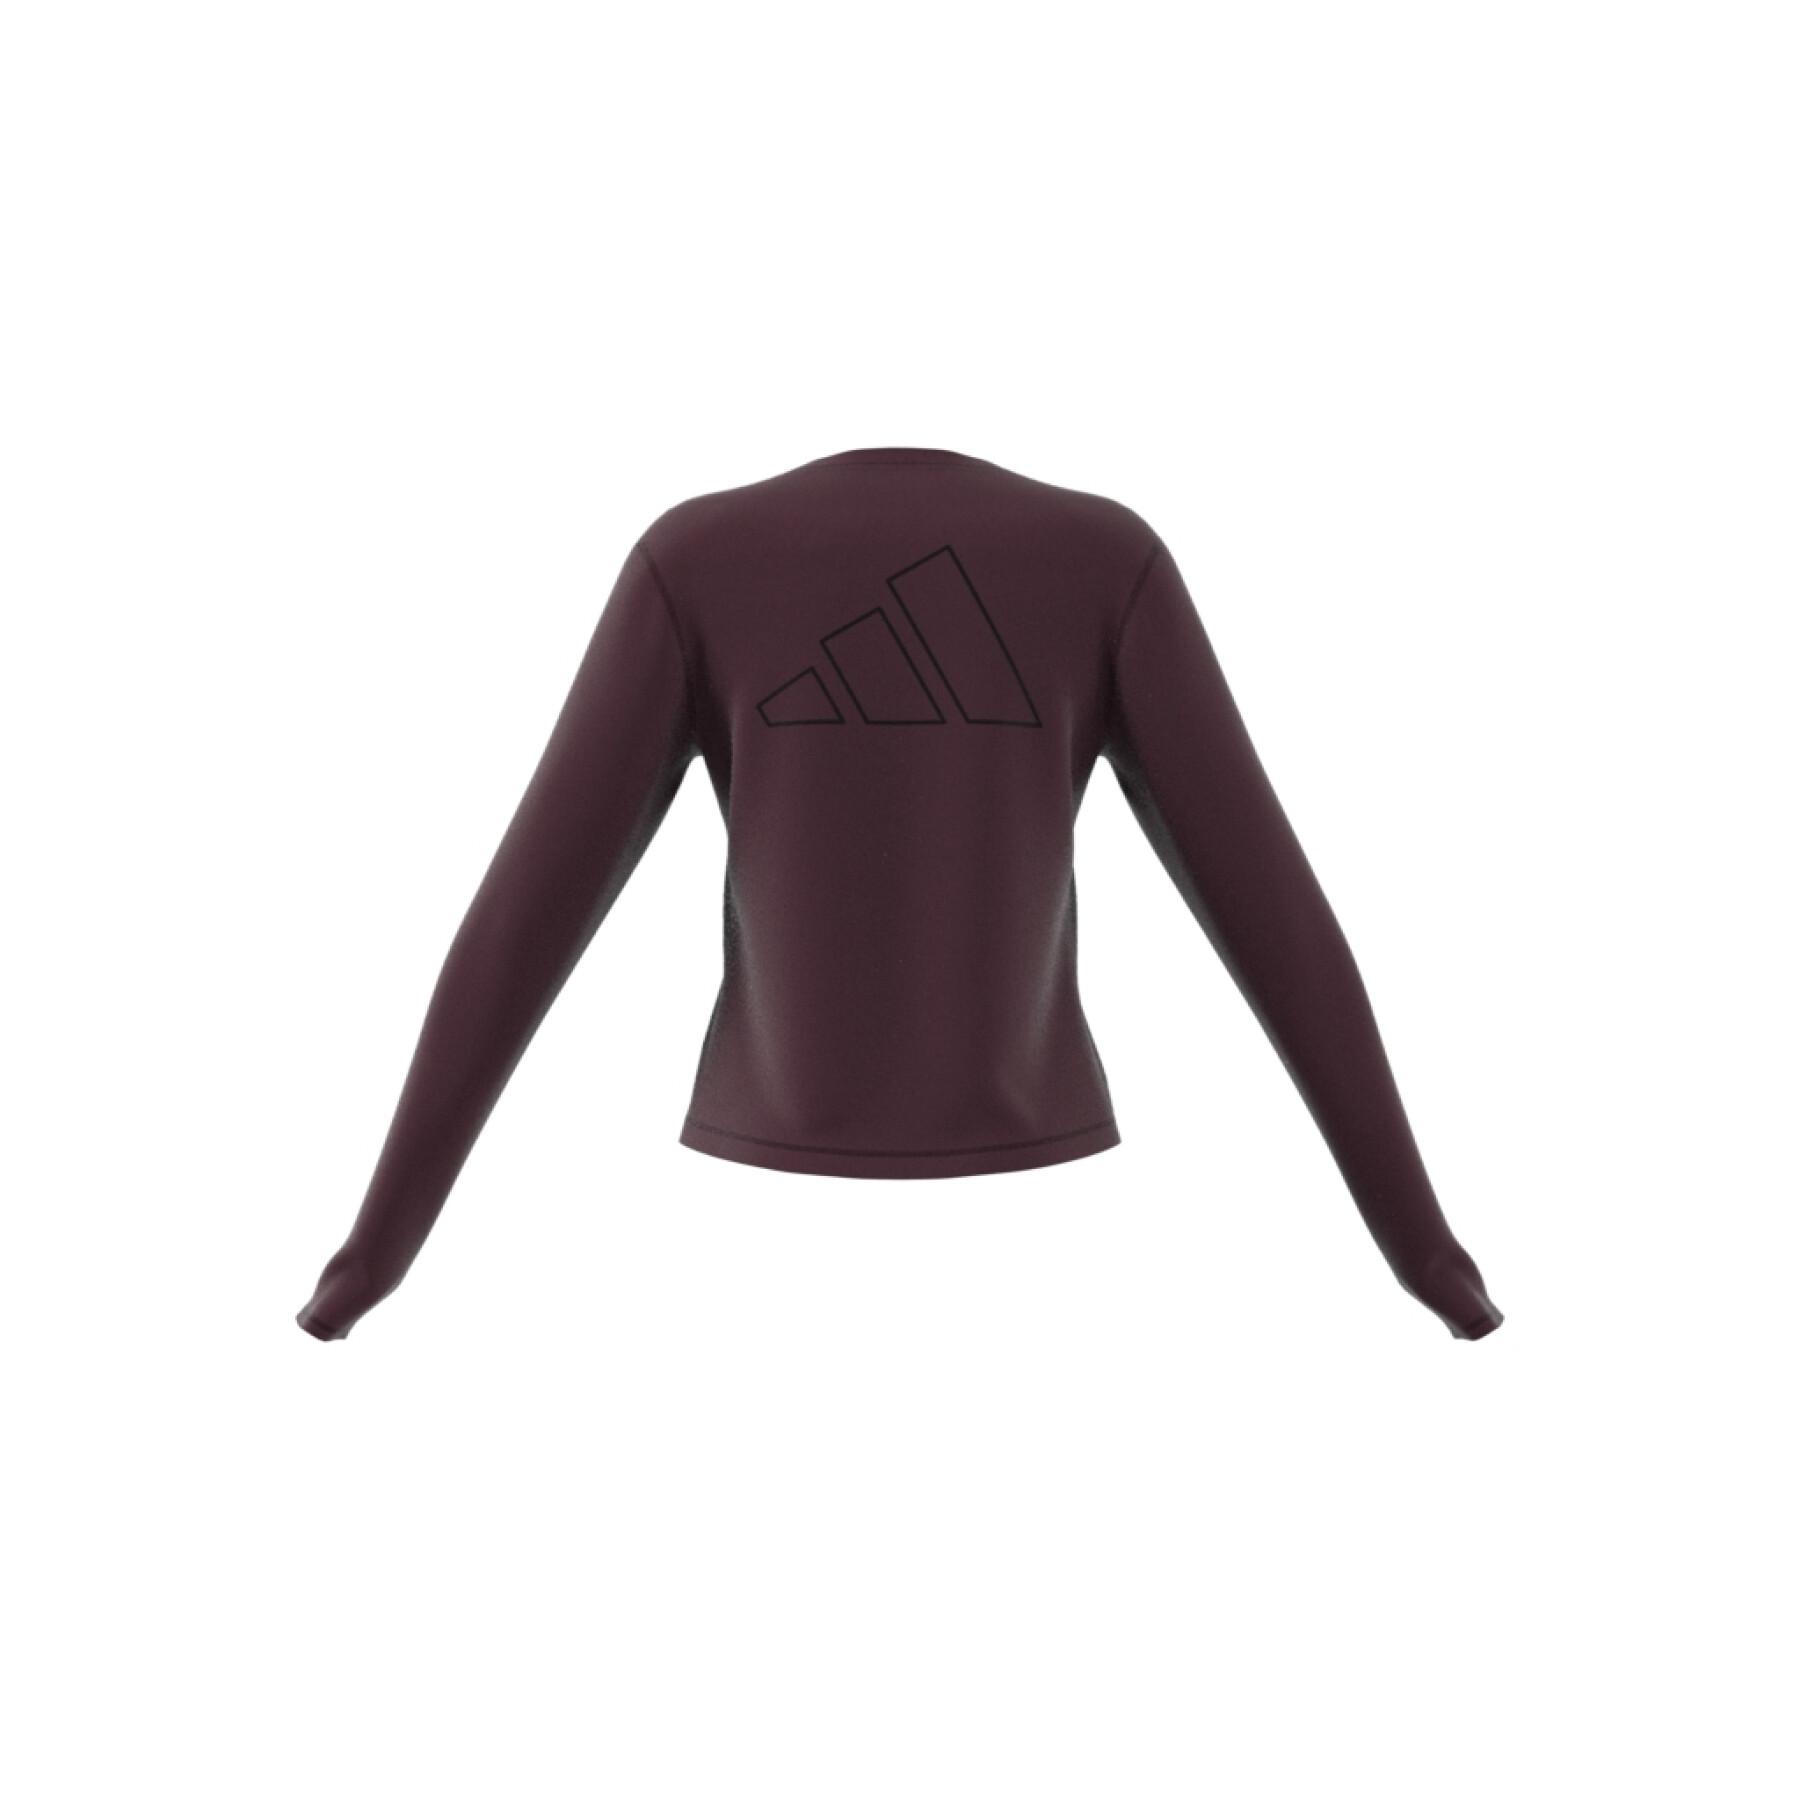 Maglia donna a maniche lunghe adidas Run icons made with nature